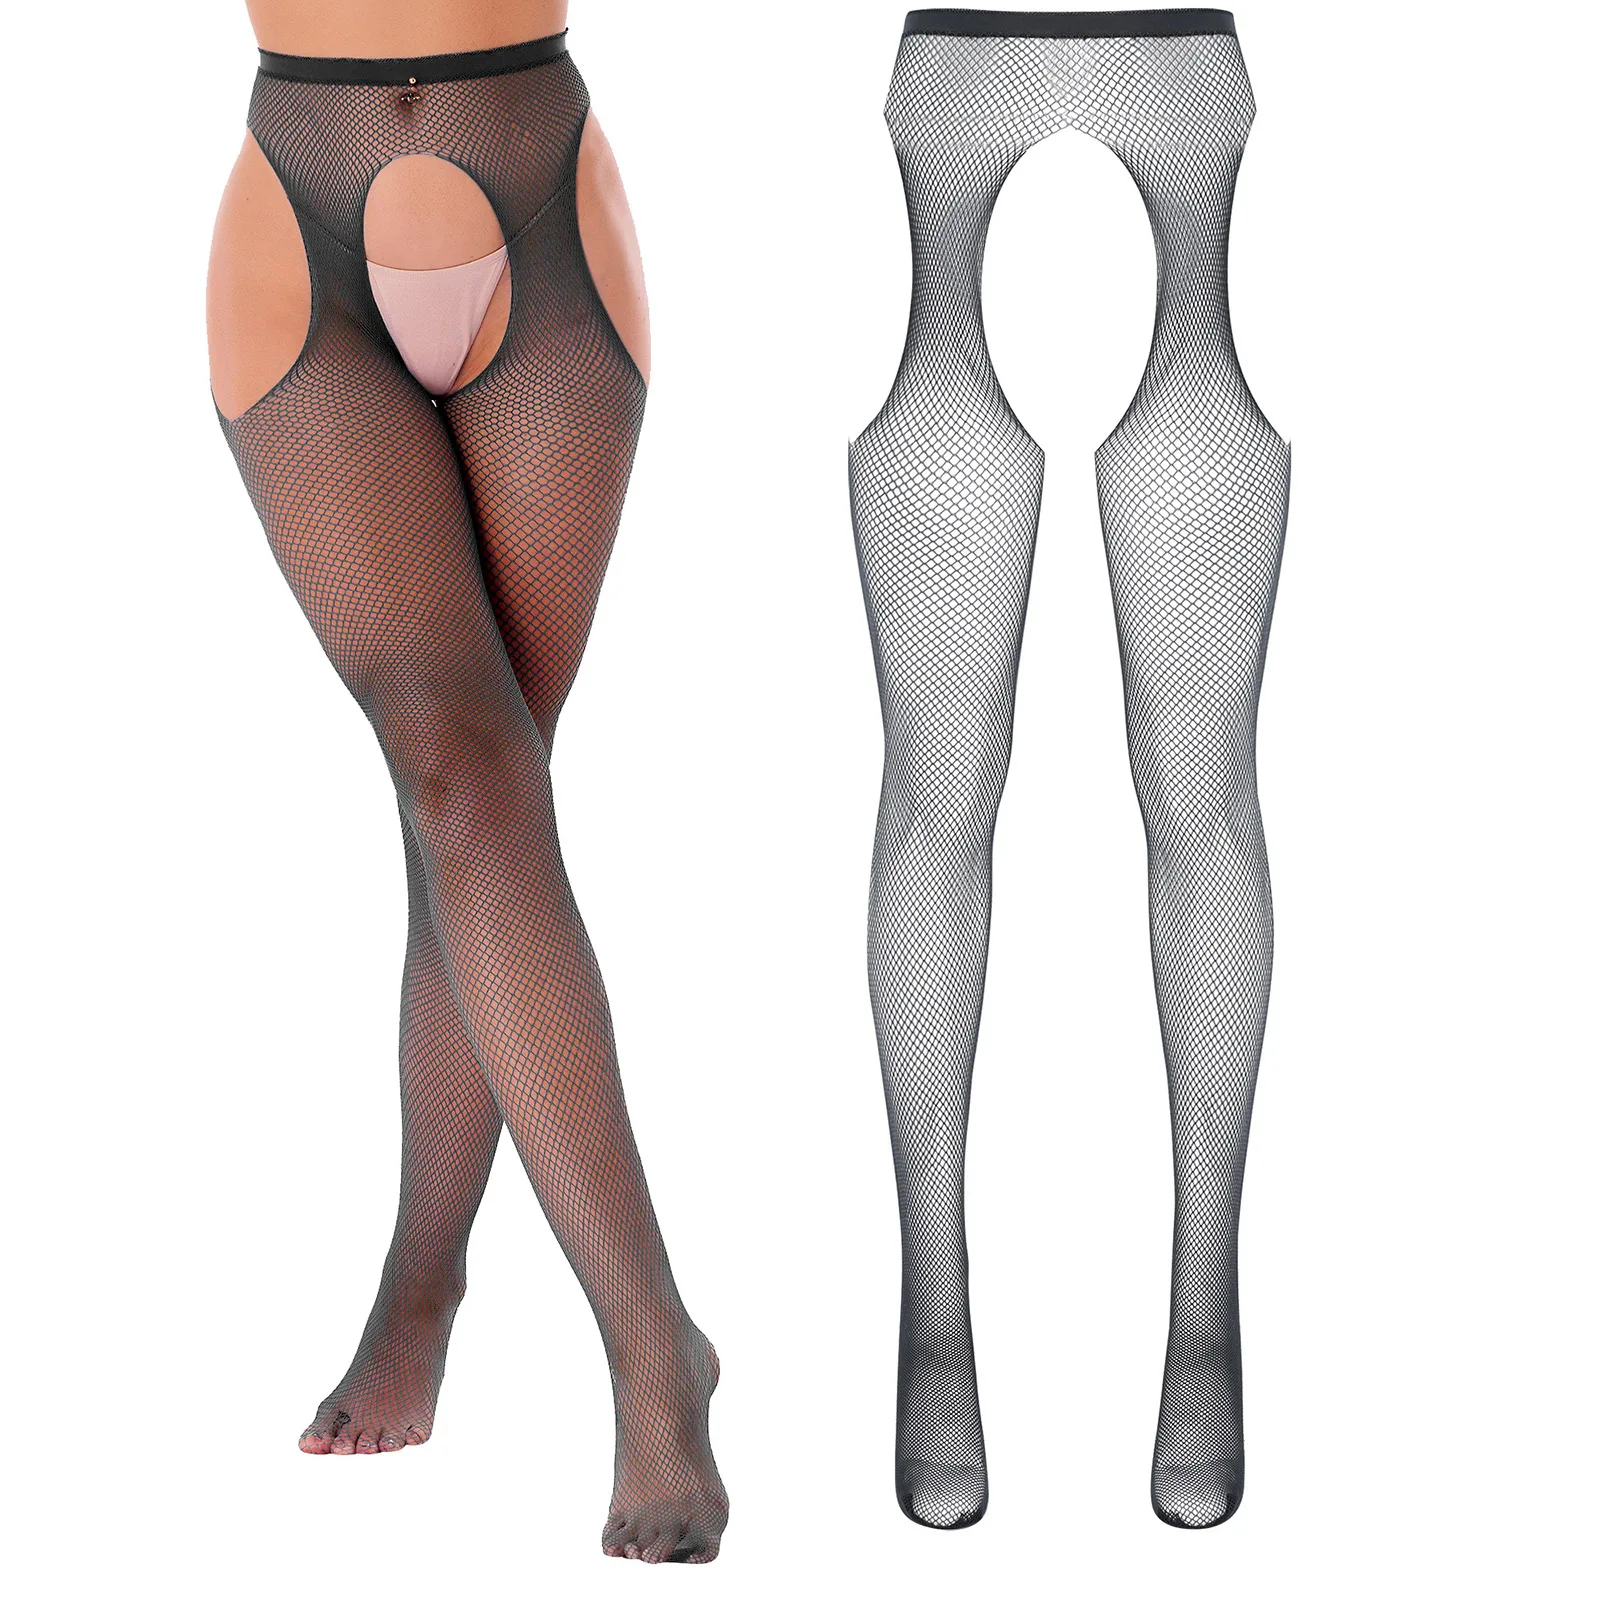 Womens Sexy Open Crotch Pantyhose Stockings Hollow Out Mid Waist Elastic Cutout Crotchless Leggings Underwear Erotic Lingerie